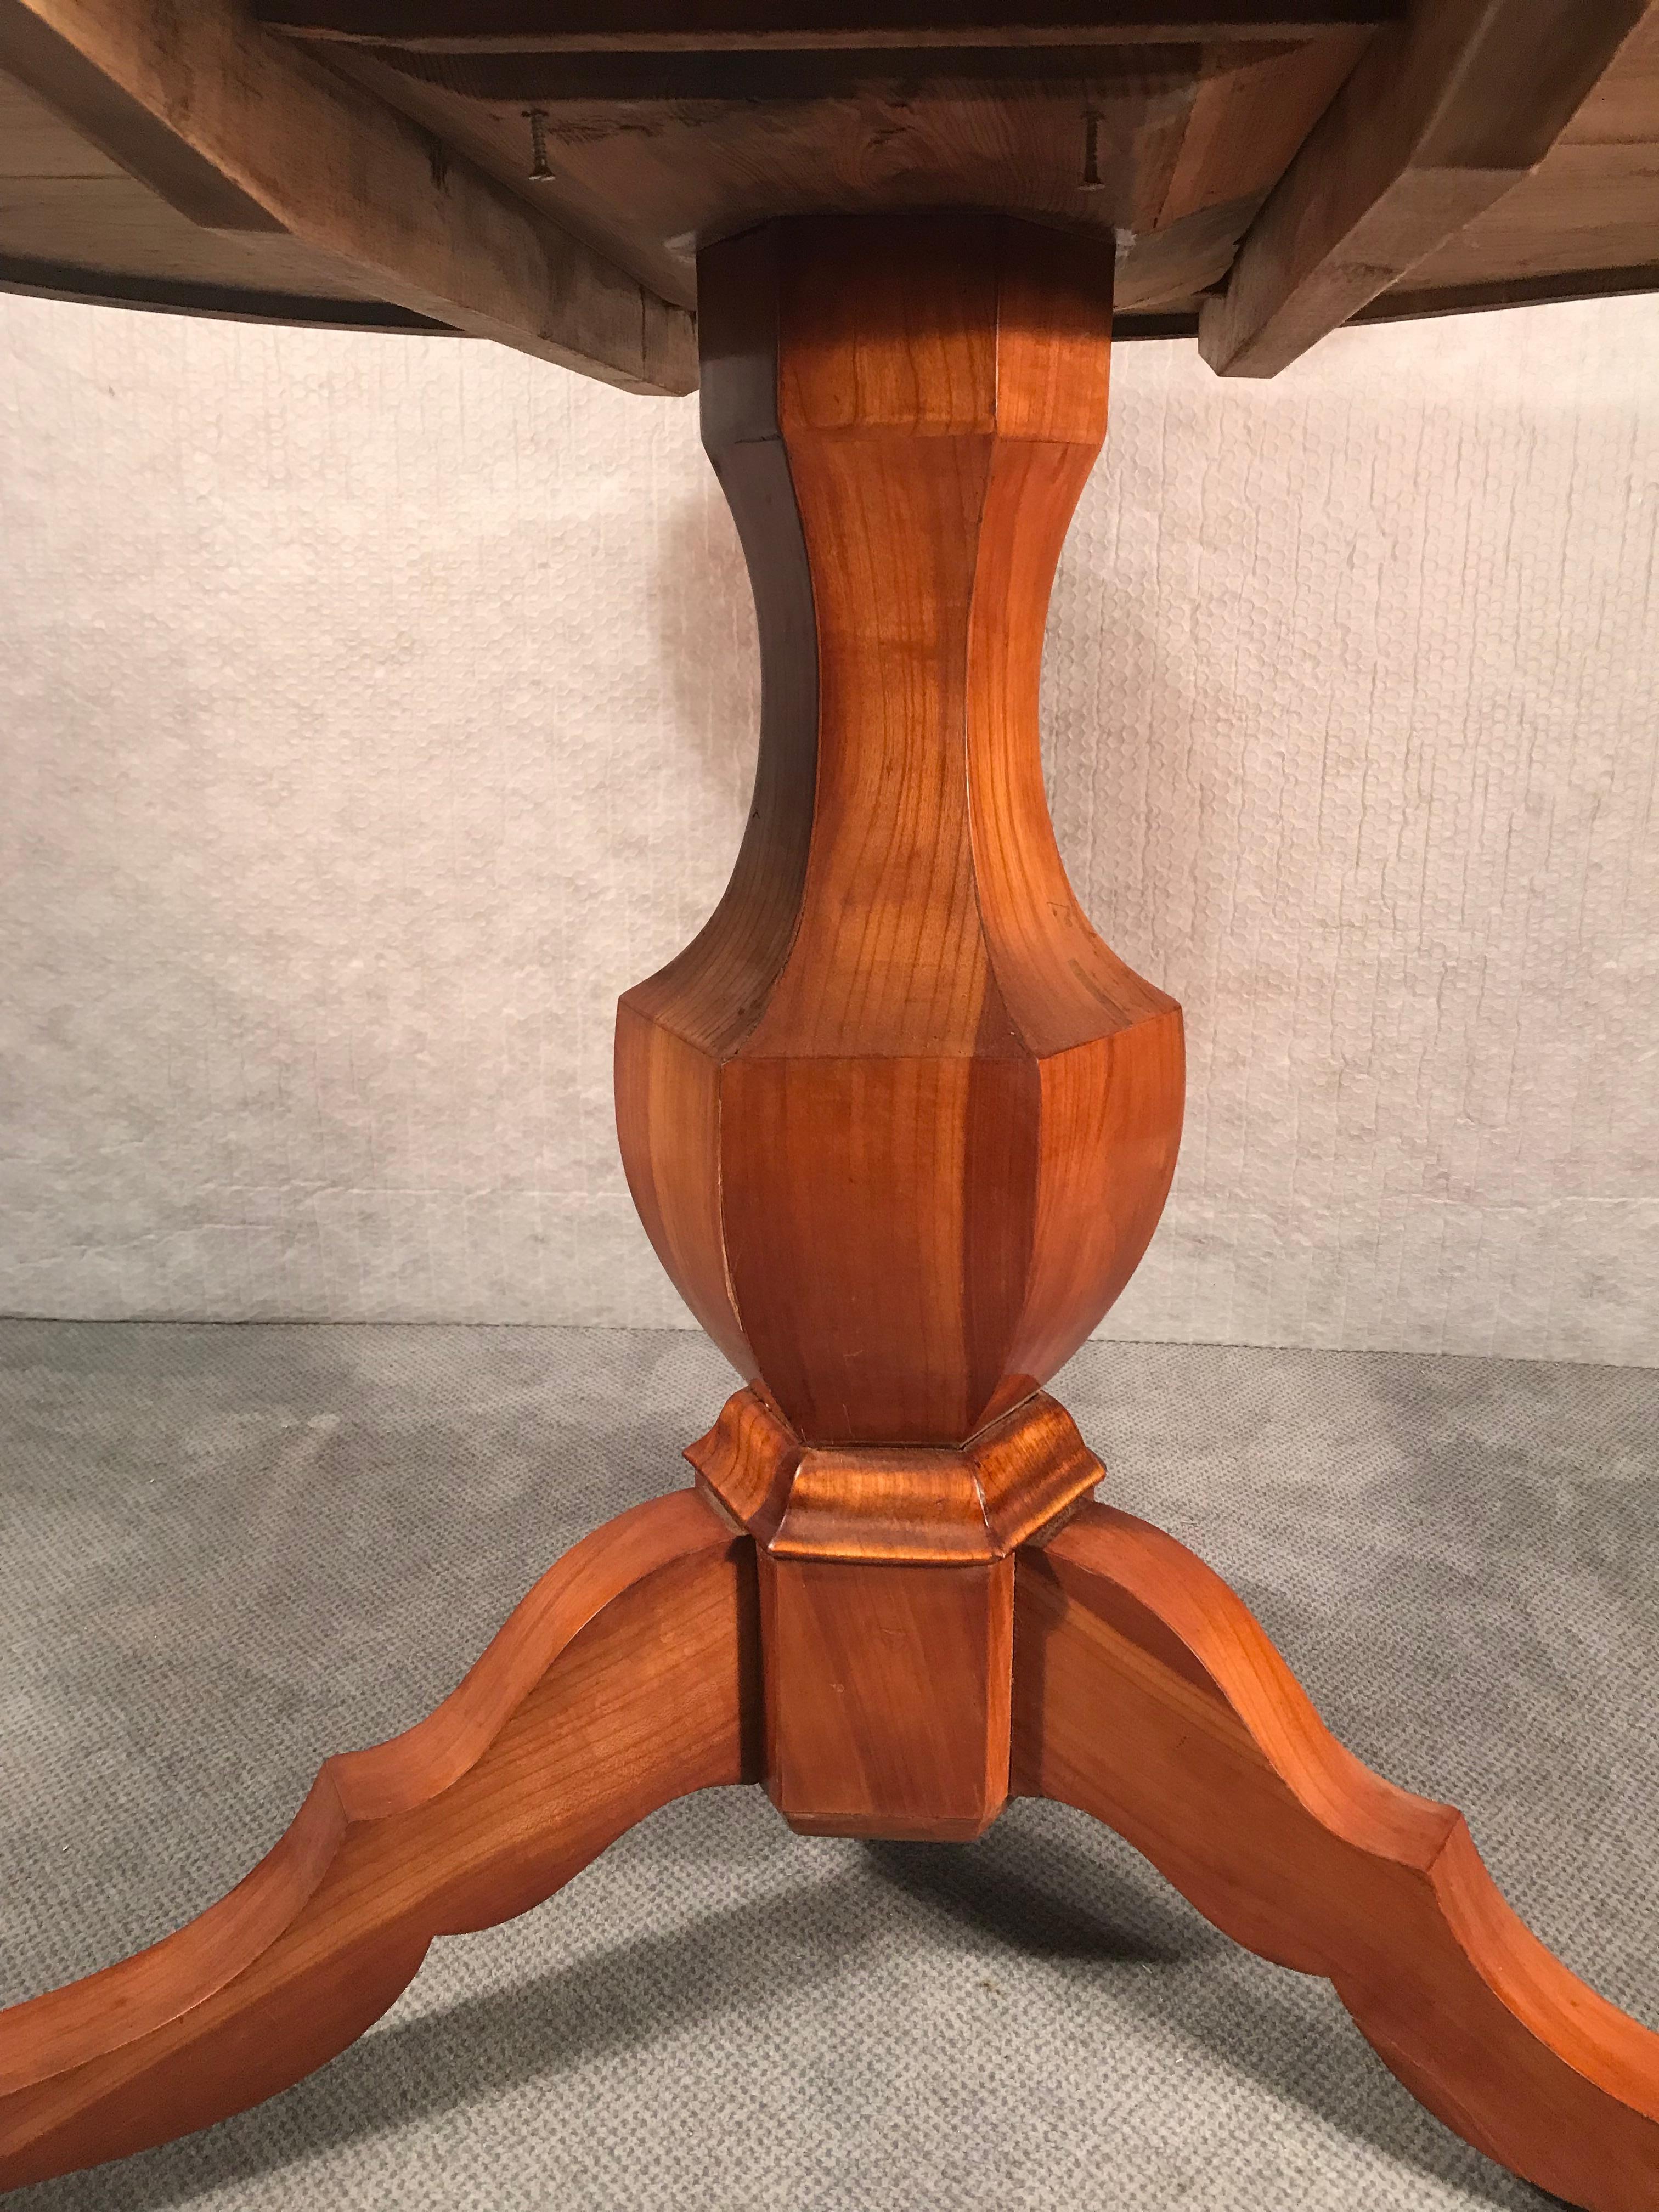 Biedermeier table, South German 1830, cherrywood veneer. The table is in good, refinished condition, French polished.